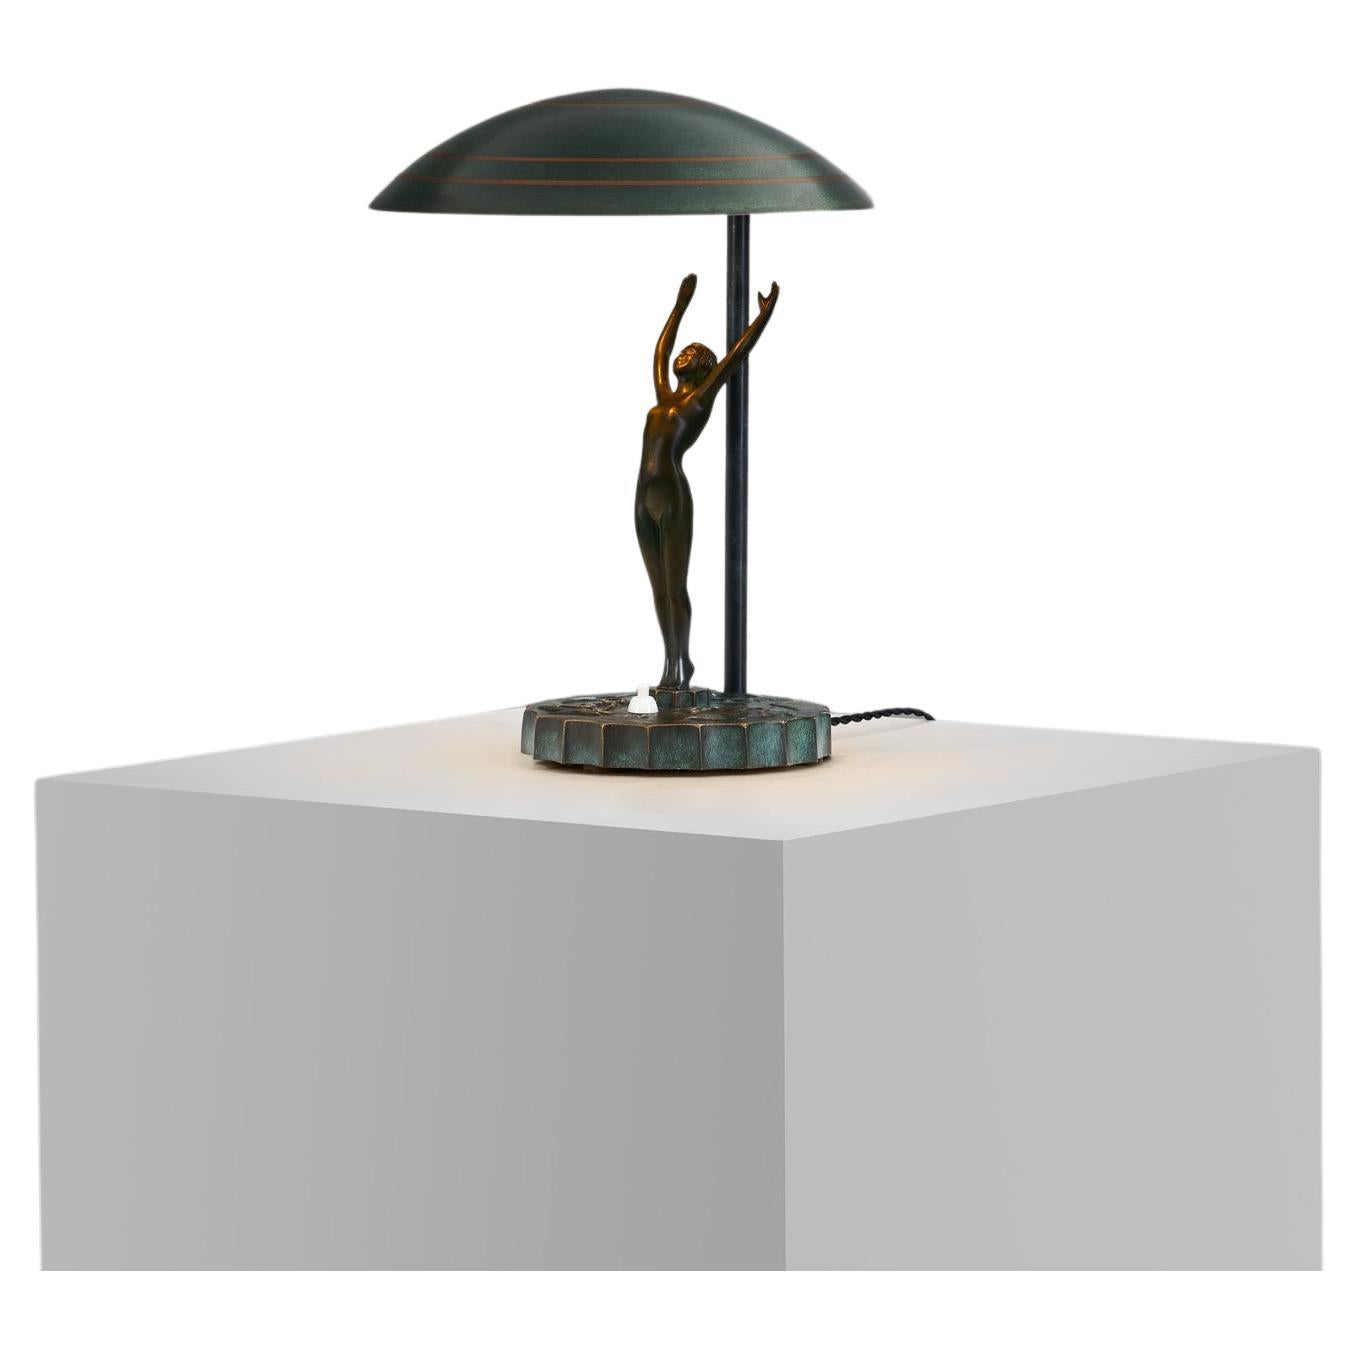 Bronze Art Deco Table Lamp, Europe ca 1930s For Sale